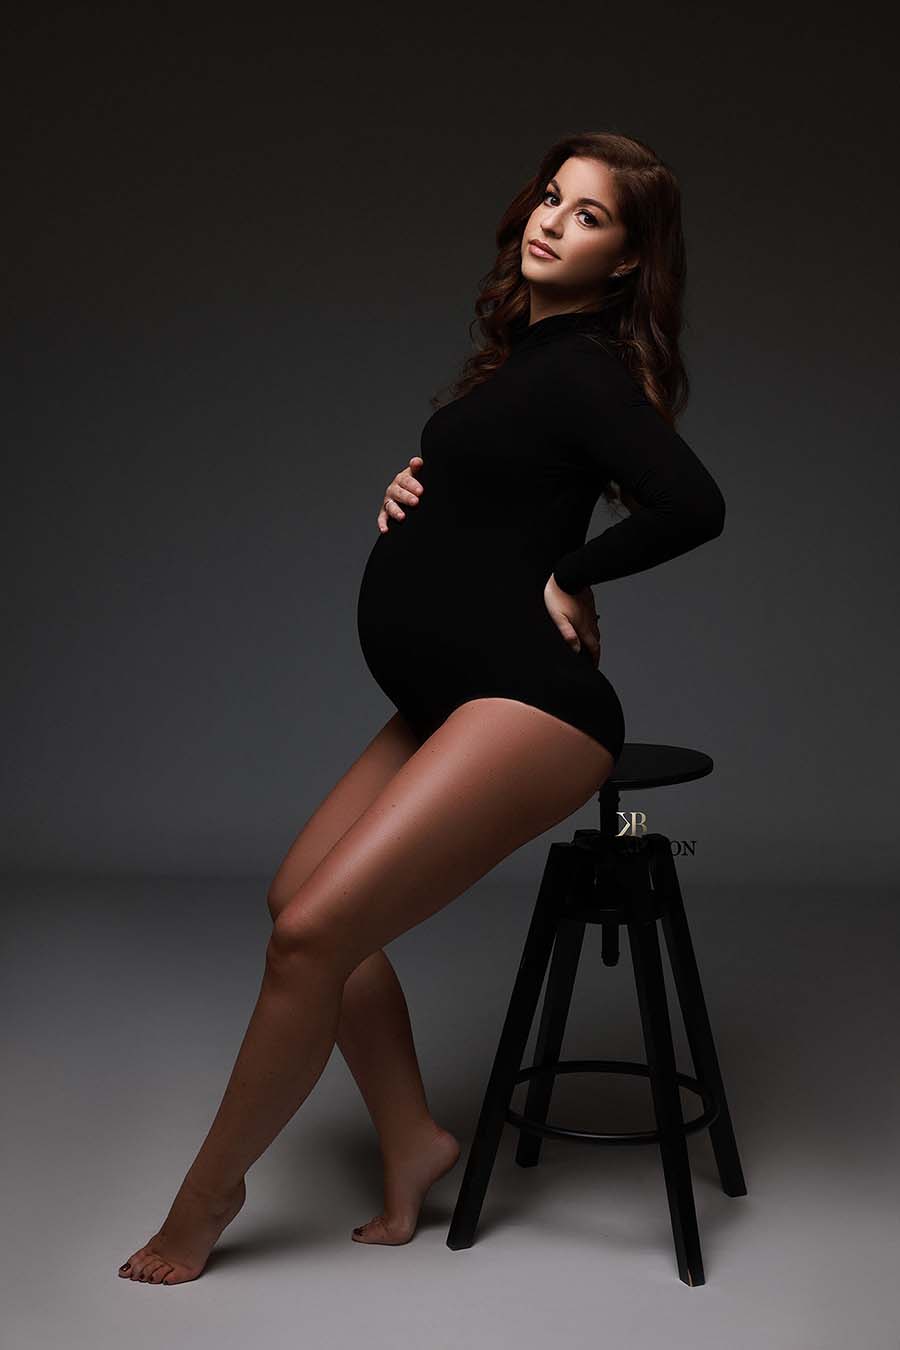 pregnant model is sitting on a stool during a maternity photoshoot in a studio. she is wearing a bodysuit with a turtleneck and long sleeves. she is looking to the camera while holding her bump and back. the bodysuit is black.